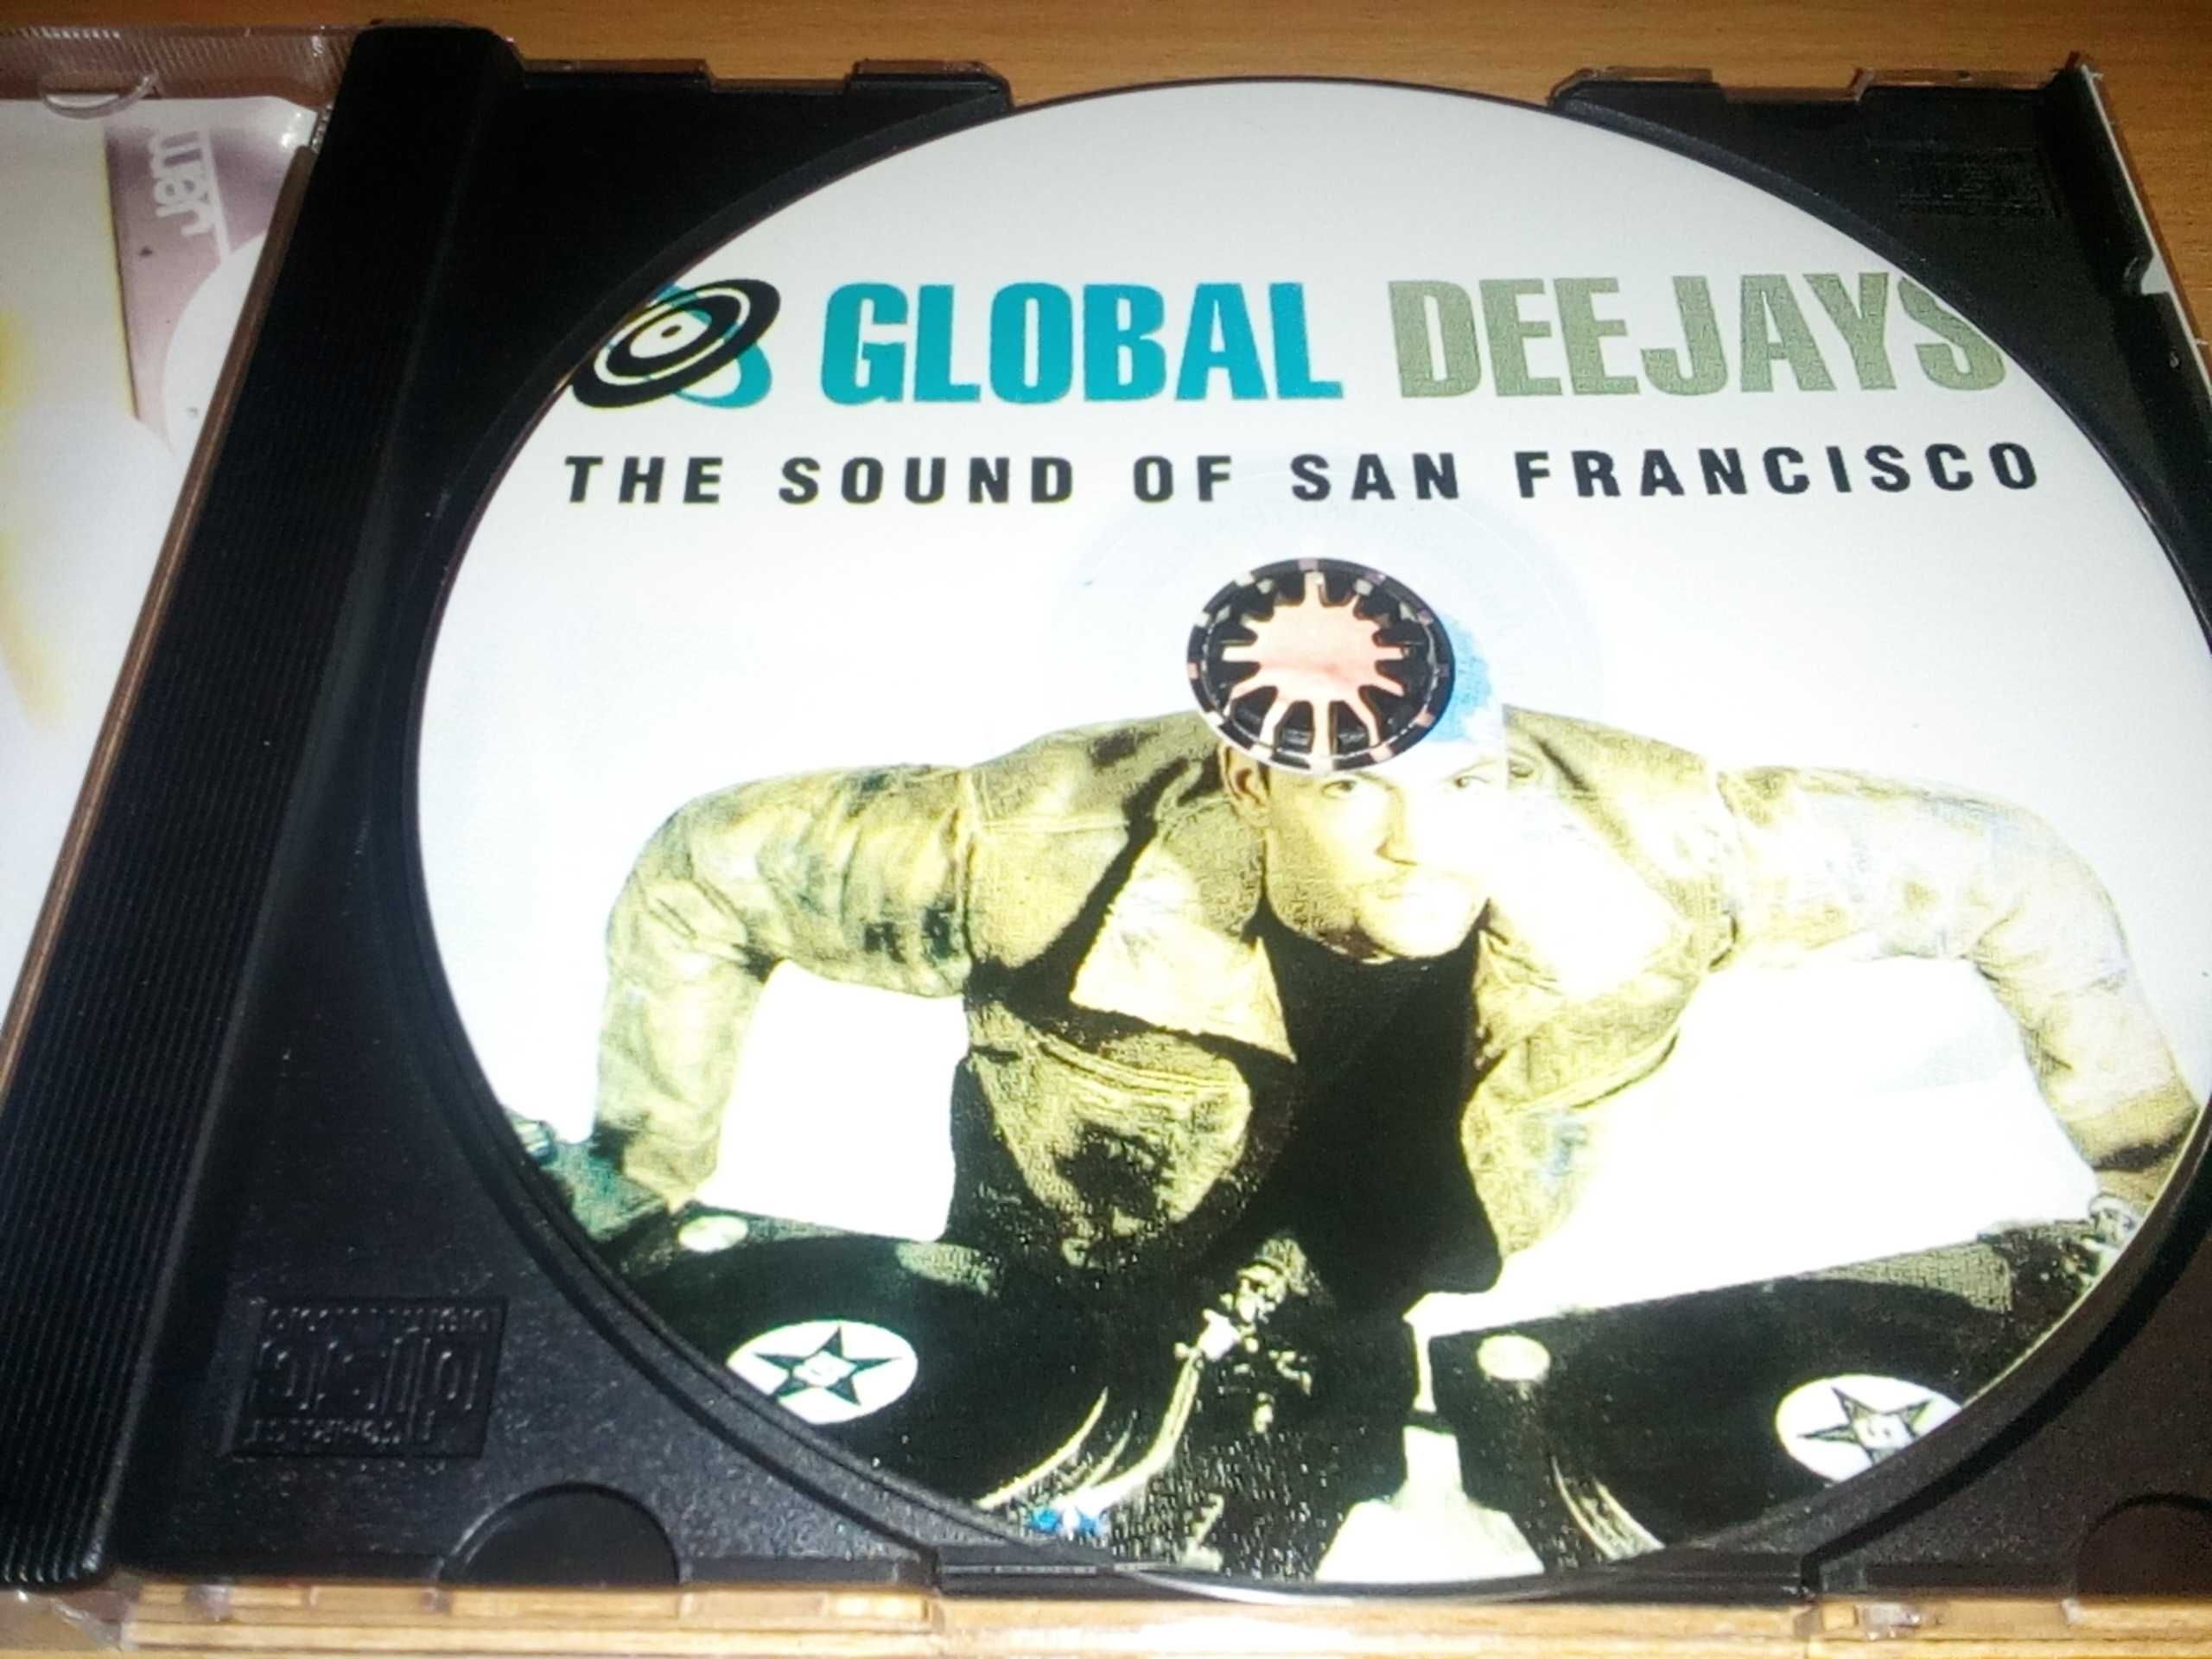 Global Deejays - The sound of San Francisco